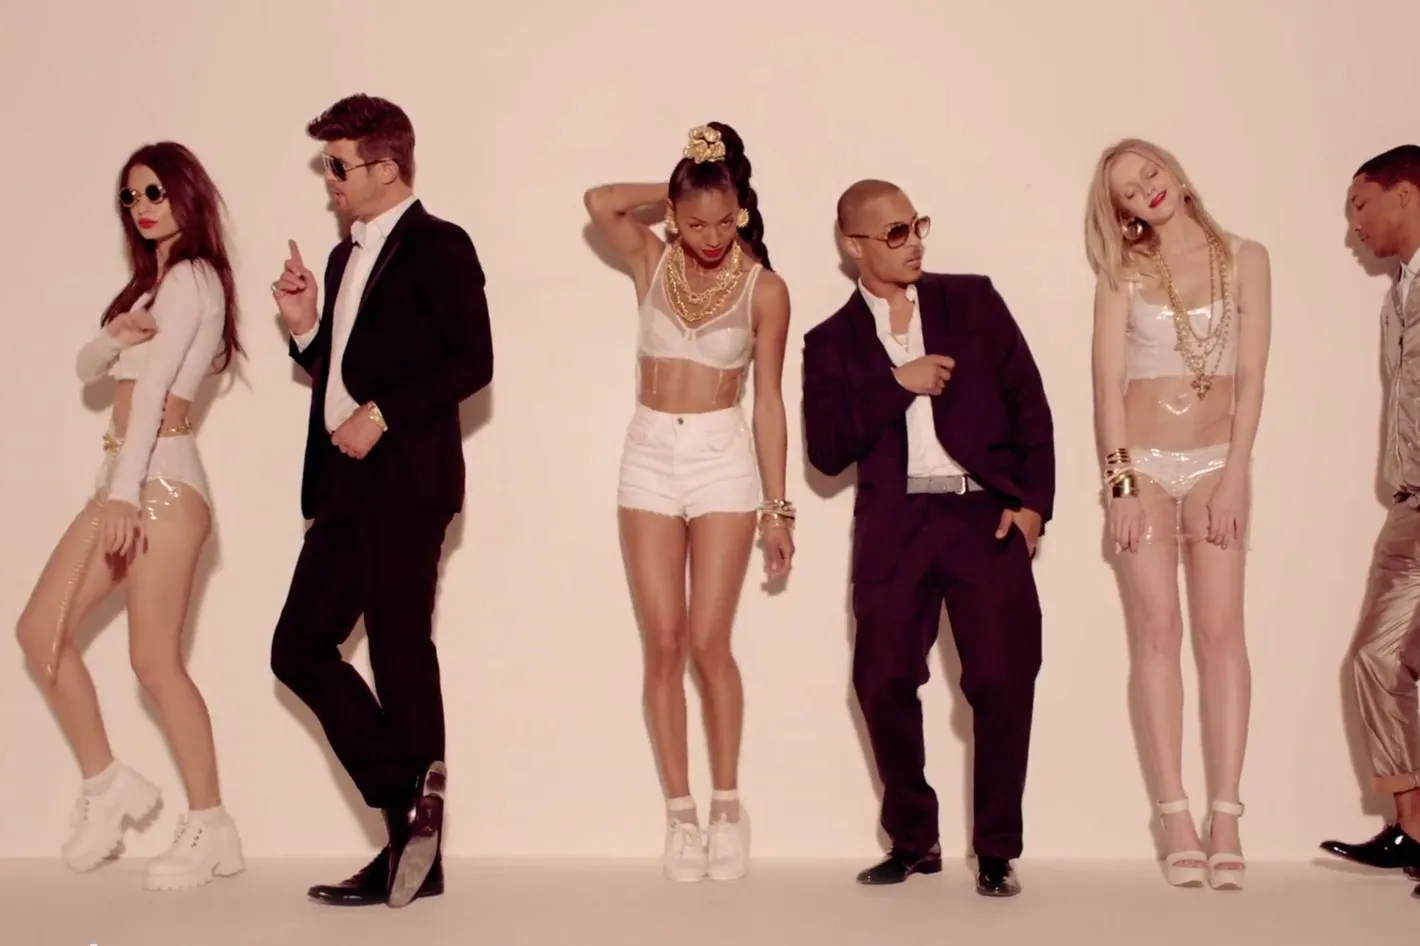 Do you remember Robin Thicke